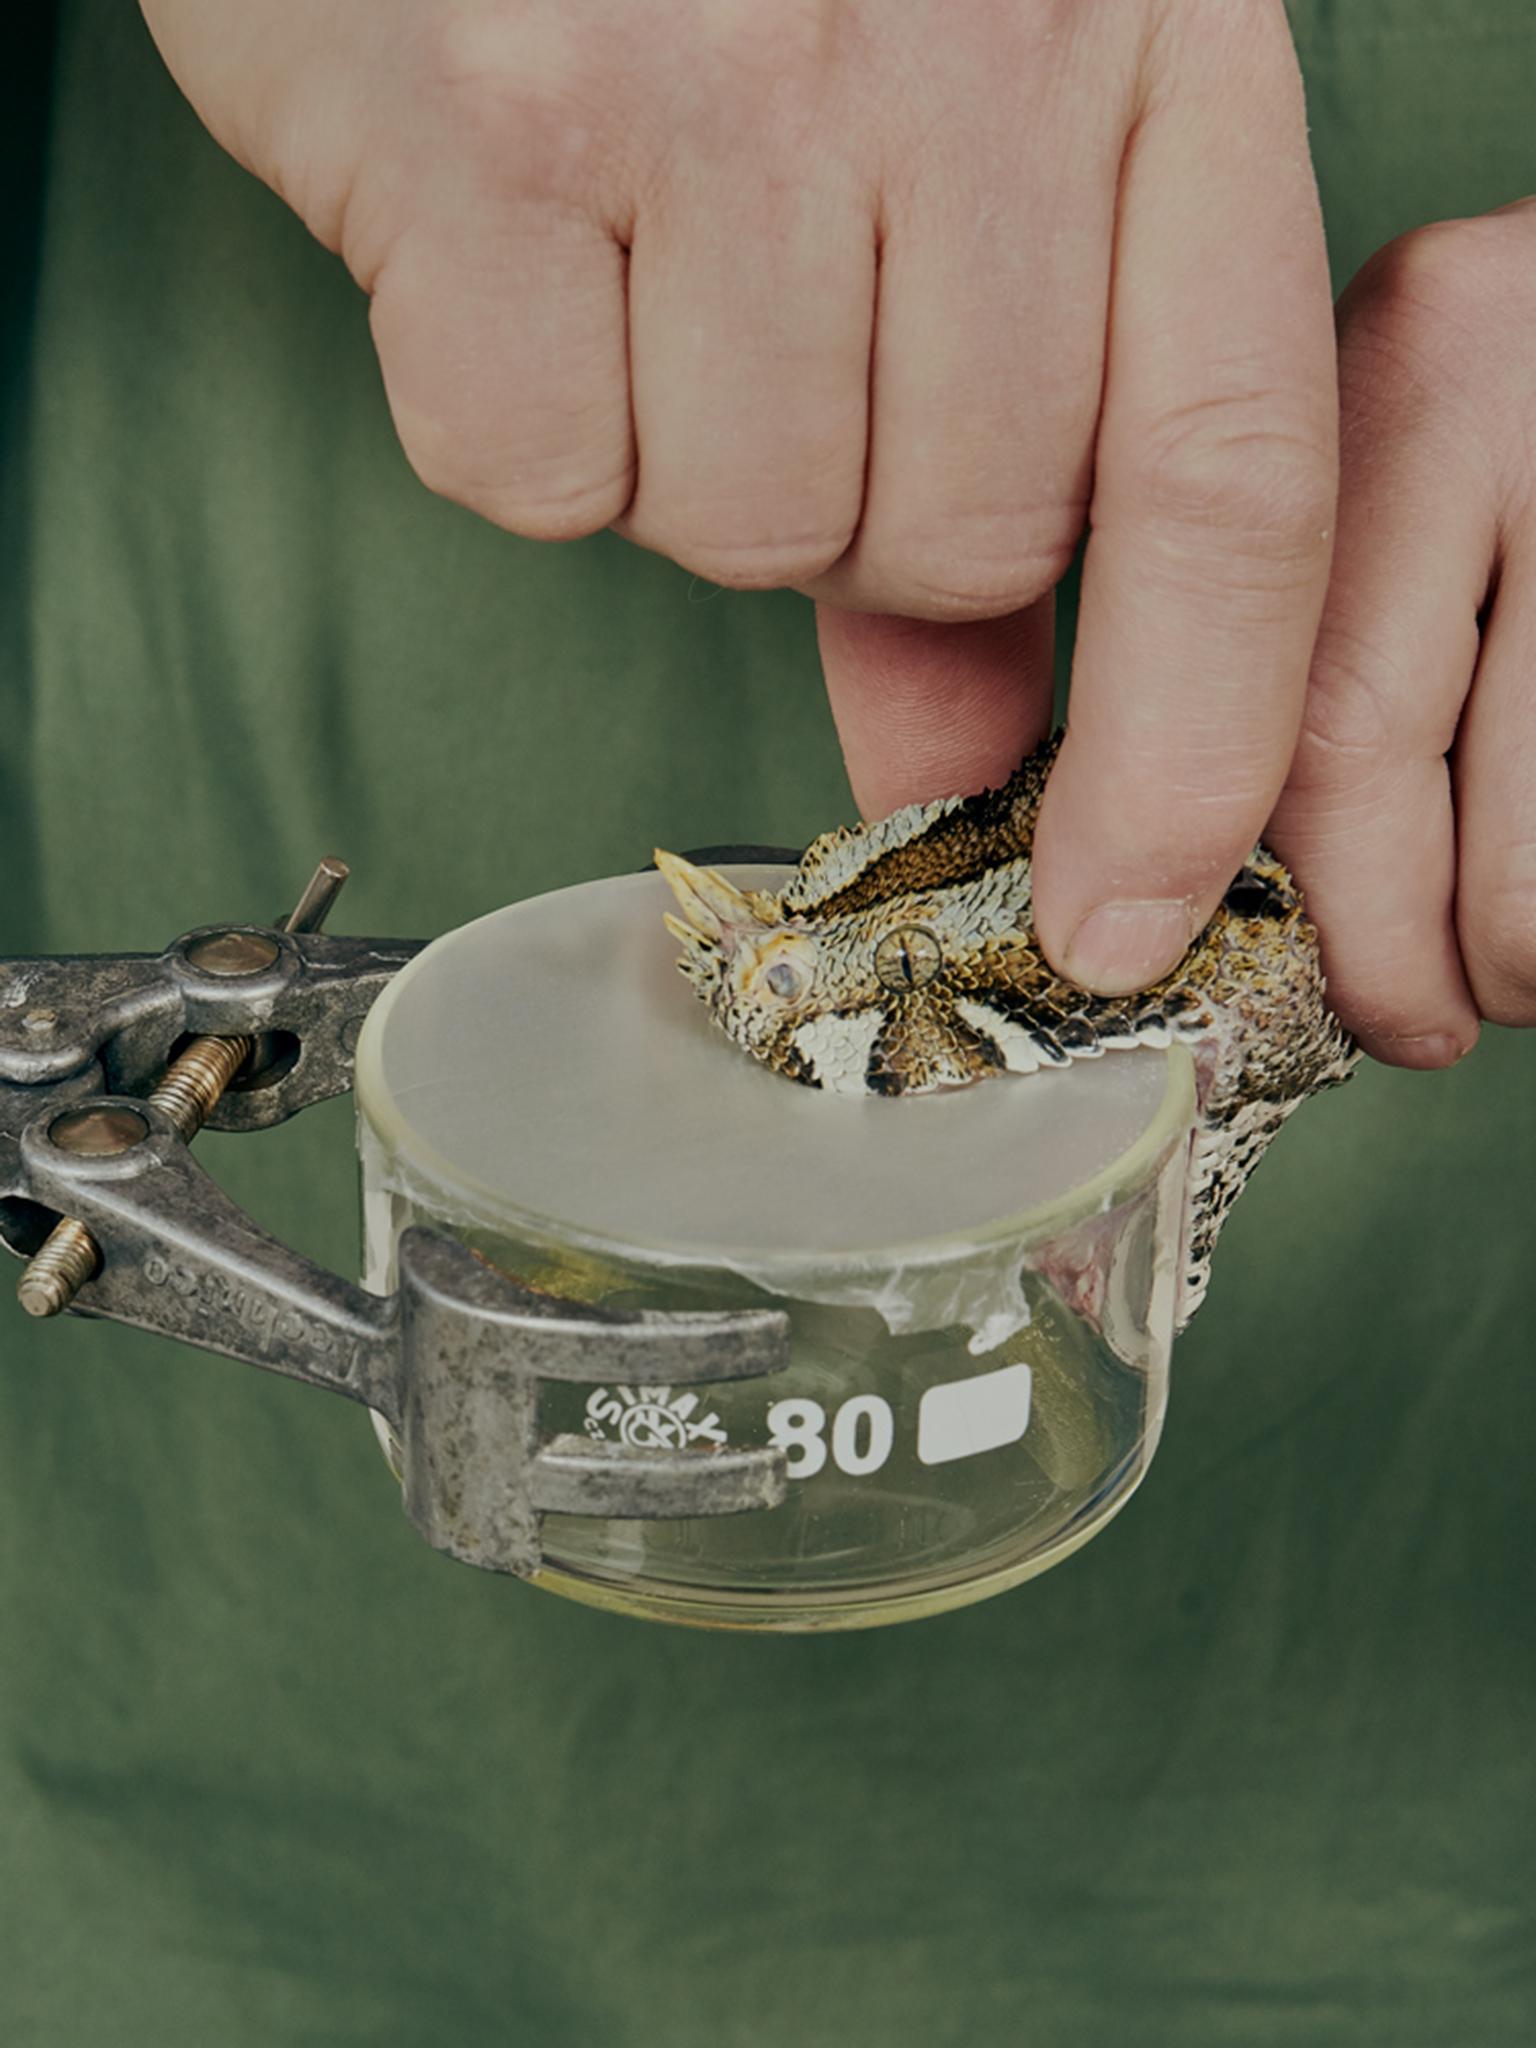 The snake bites on a small container topped with cling film (Wellcome Trust)